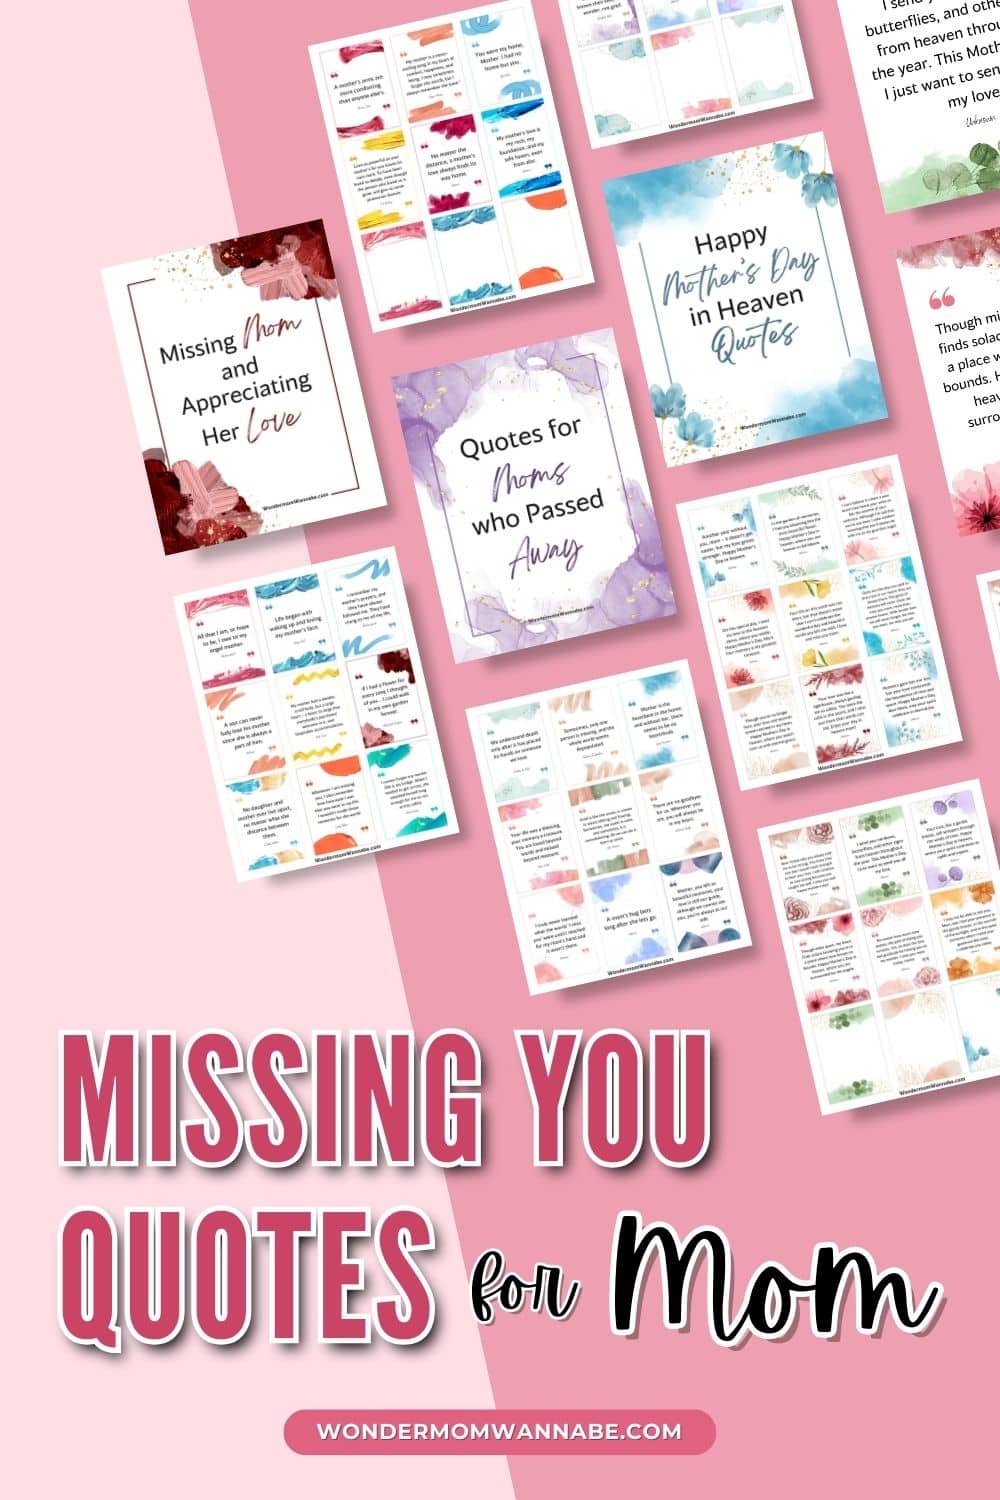 Missing you quotes for mom.